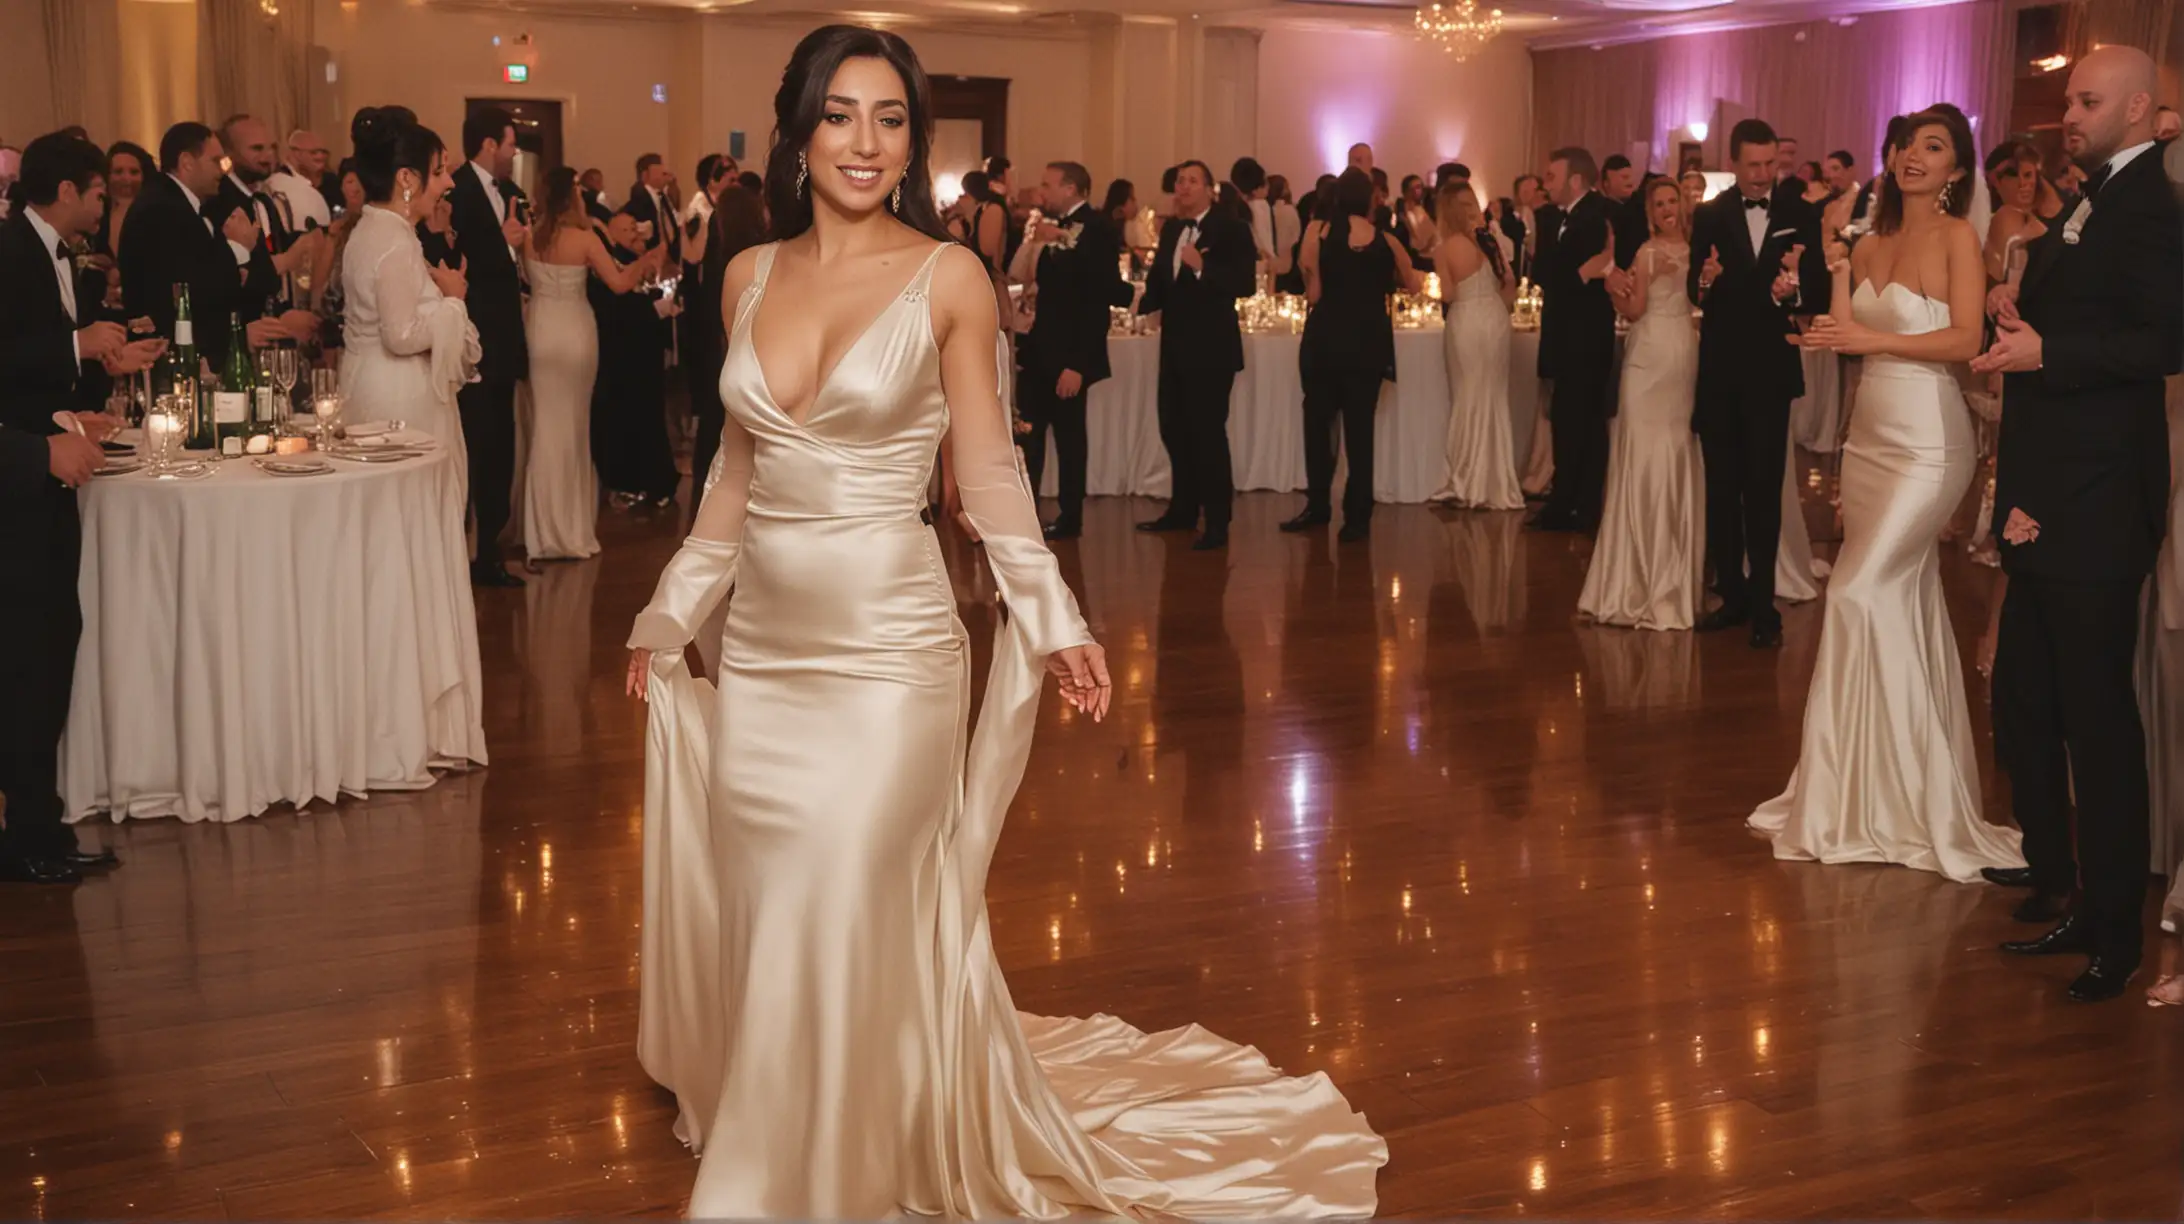 My beautiful 30 year old arab american bride wearing a form fitting ivory silk satin gown, on the dancefloor at the reception